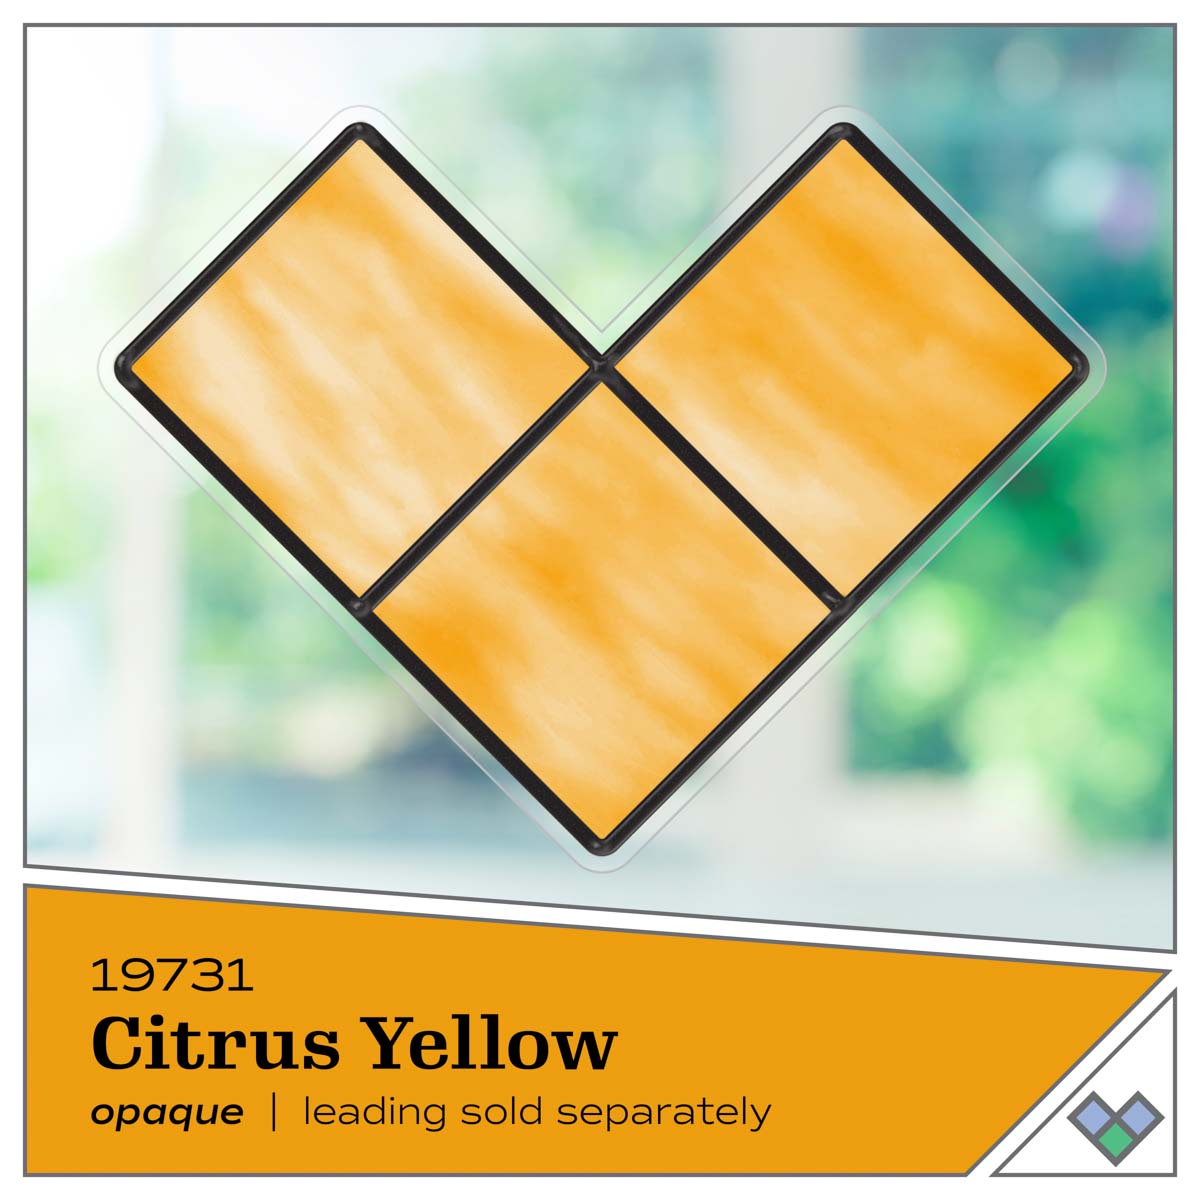 Gallery Glass ® Stained Glass Effect Paint - Citrus Yellow, 2 oz. - 19731